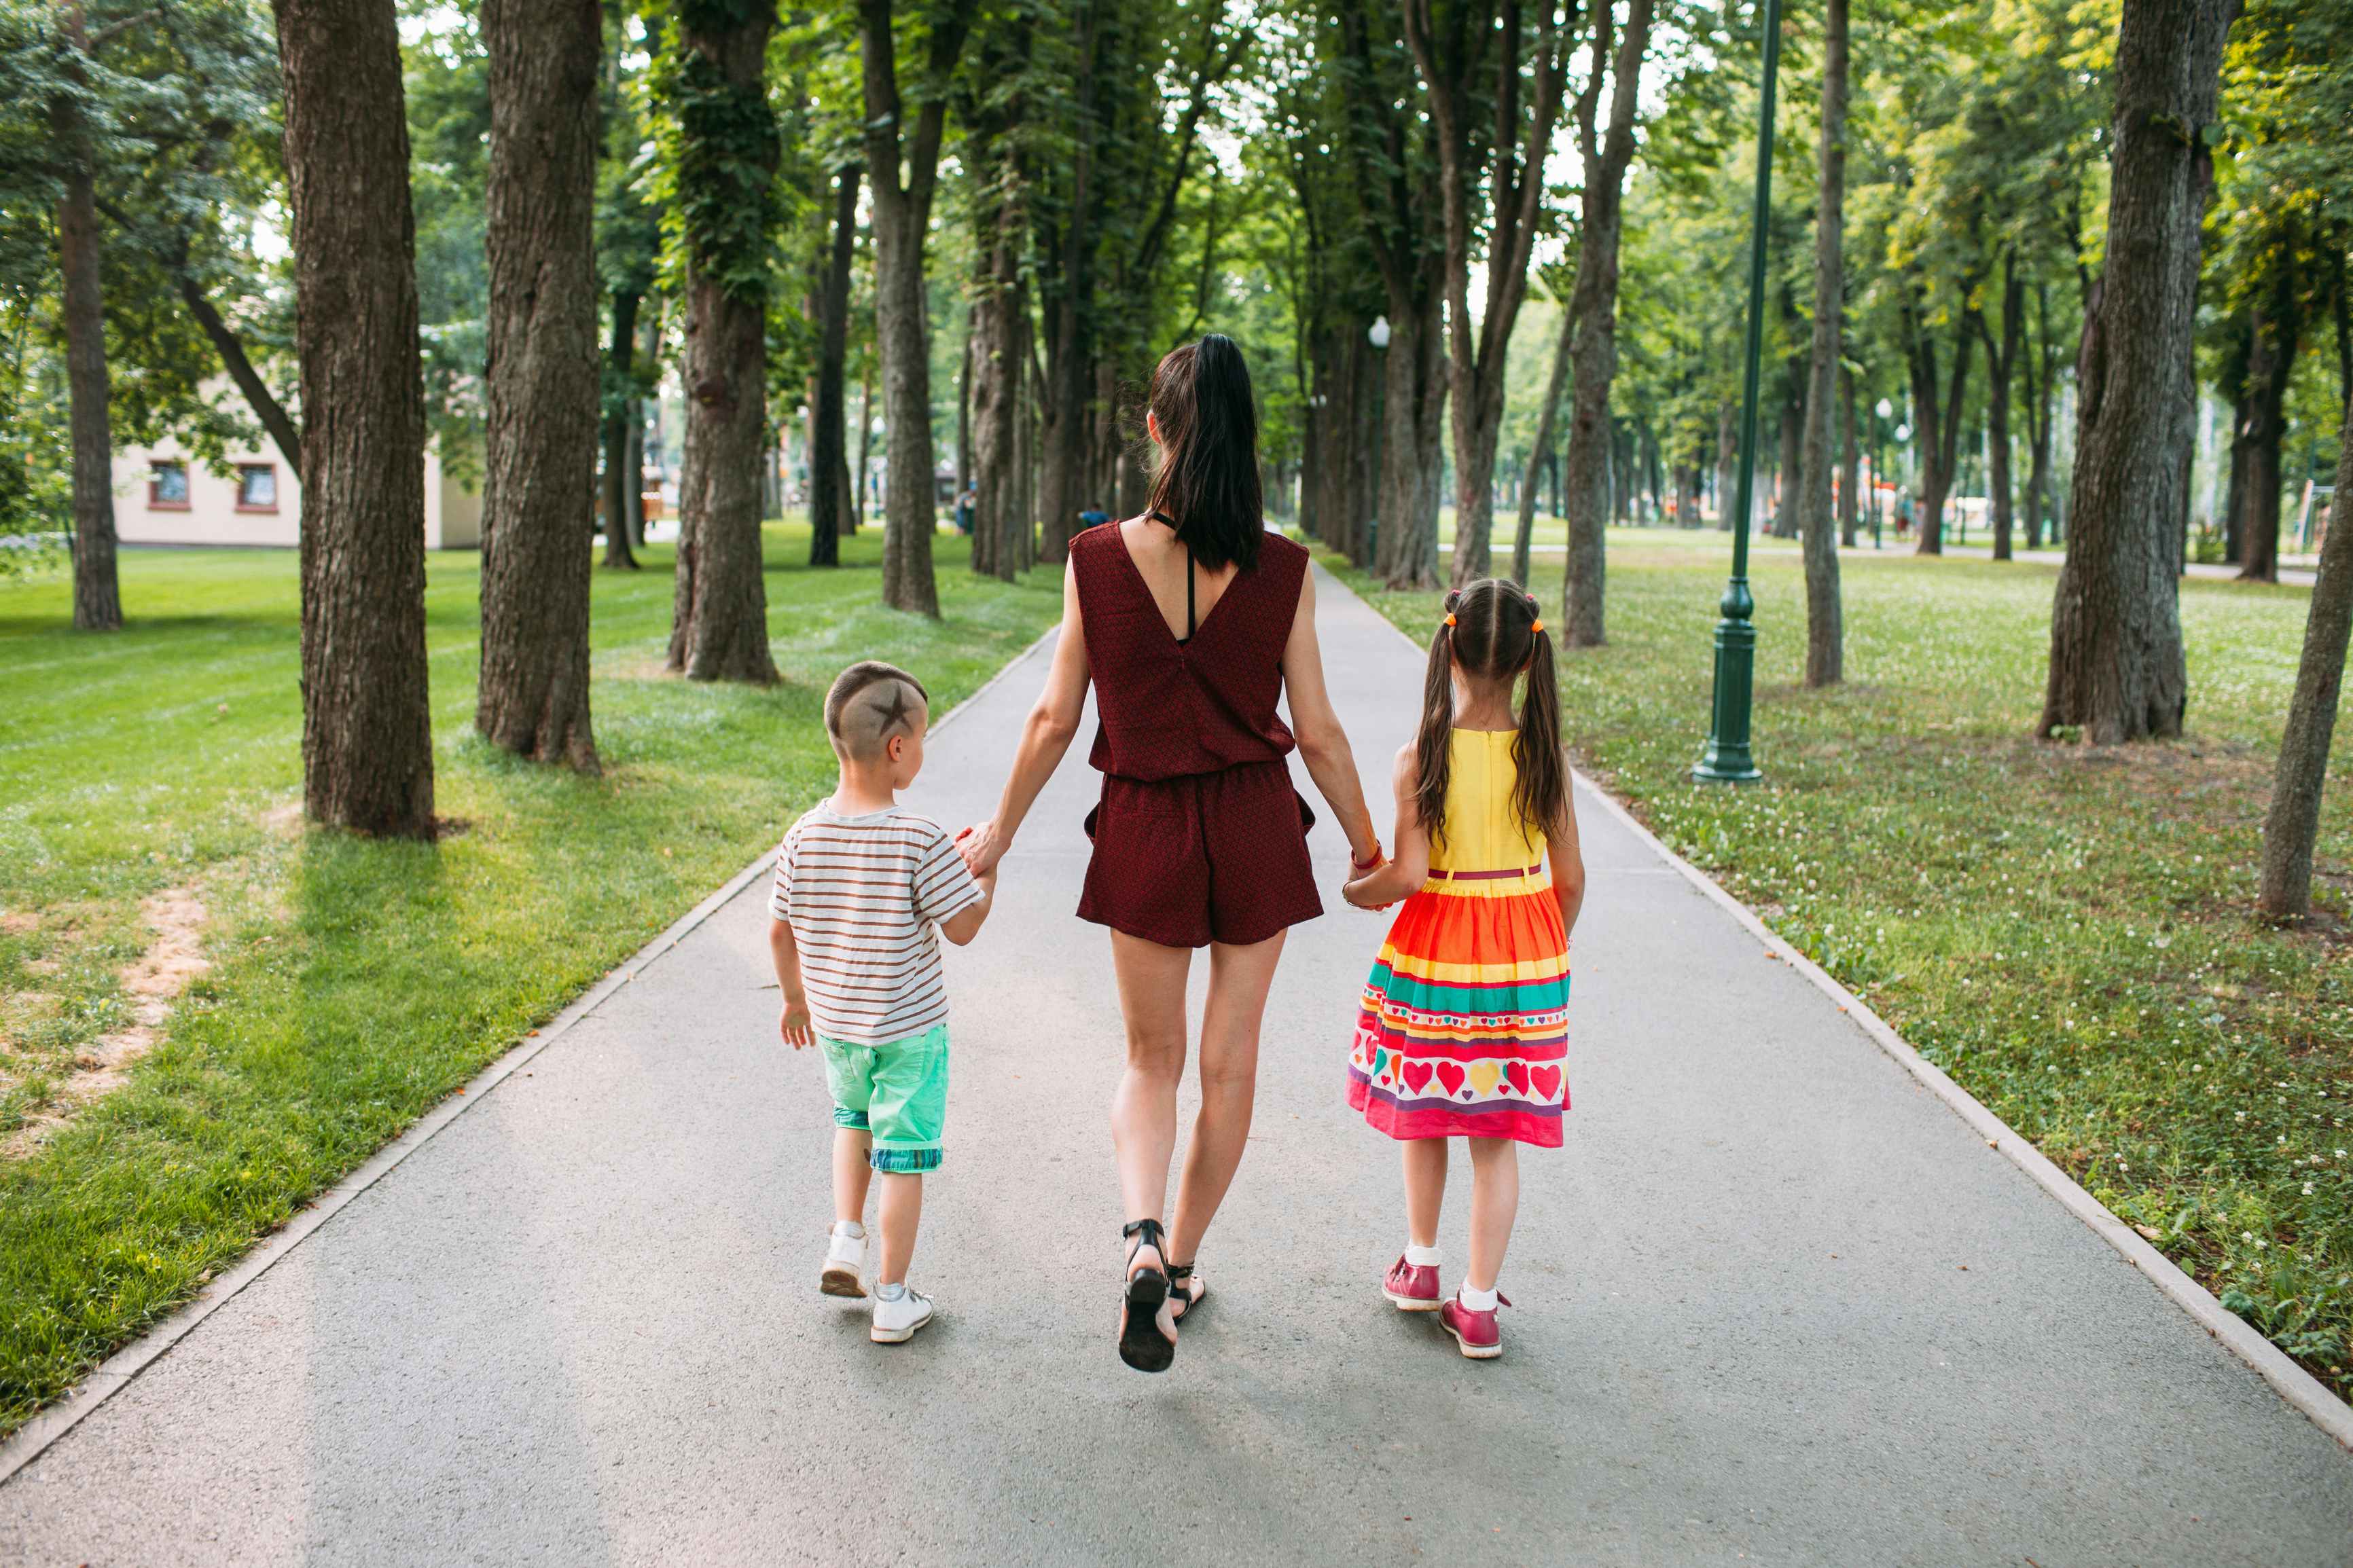 A parent walking through a park, holding the hands of two children